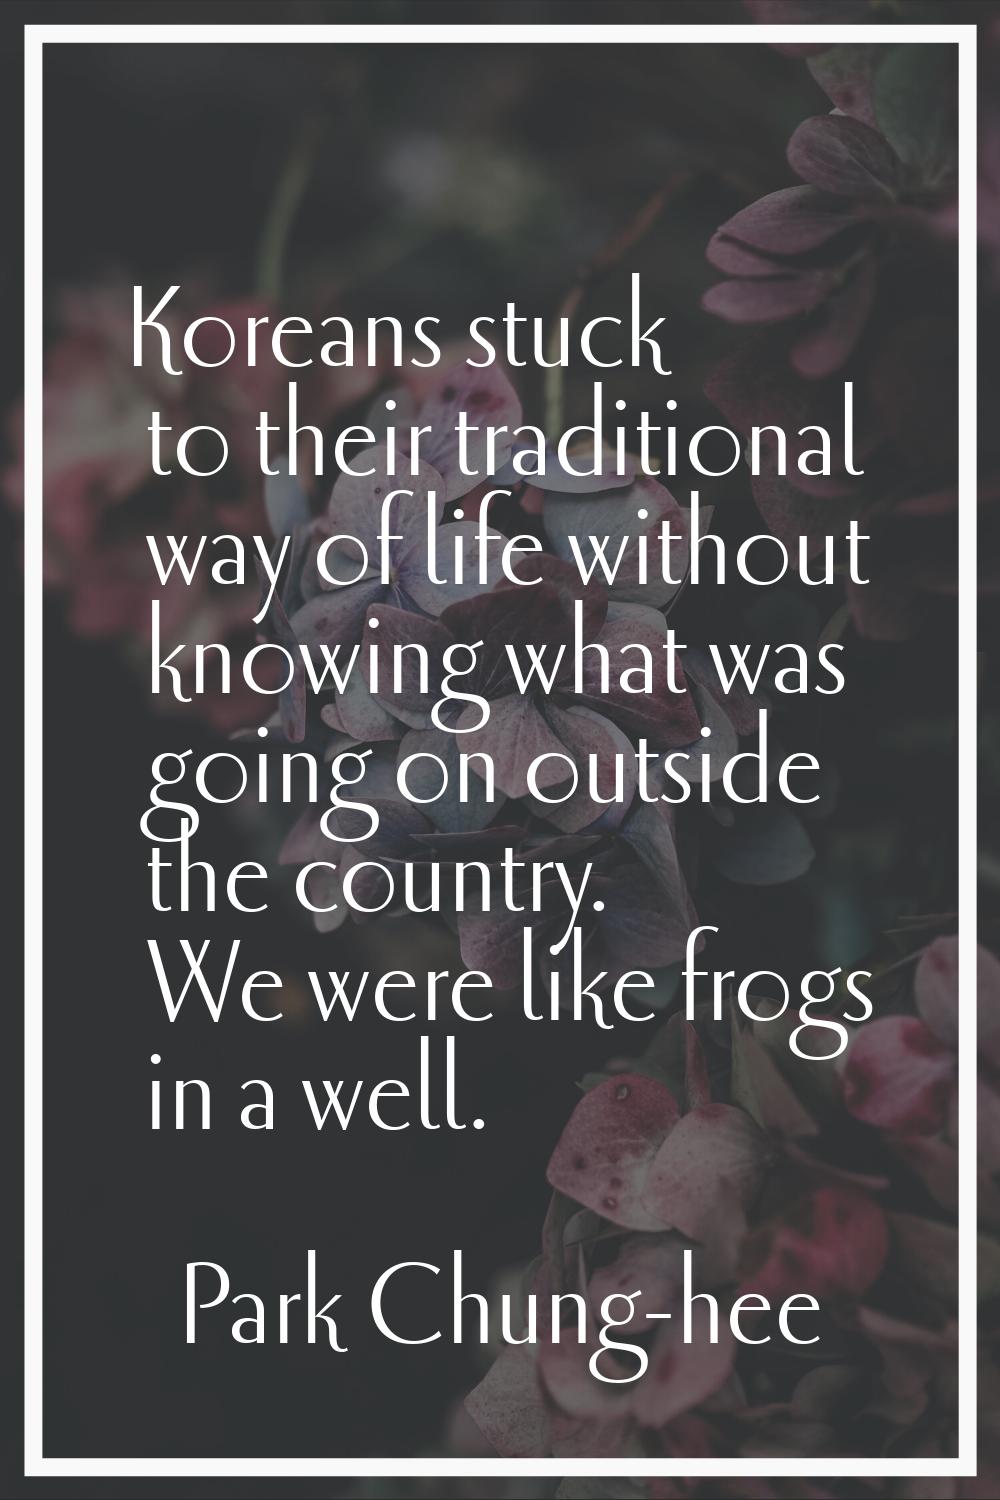 Koreans stuck to their traditional way of life without knowing what was going on outside the countr